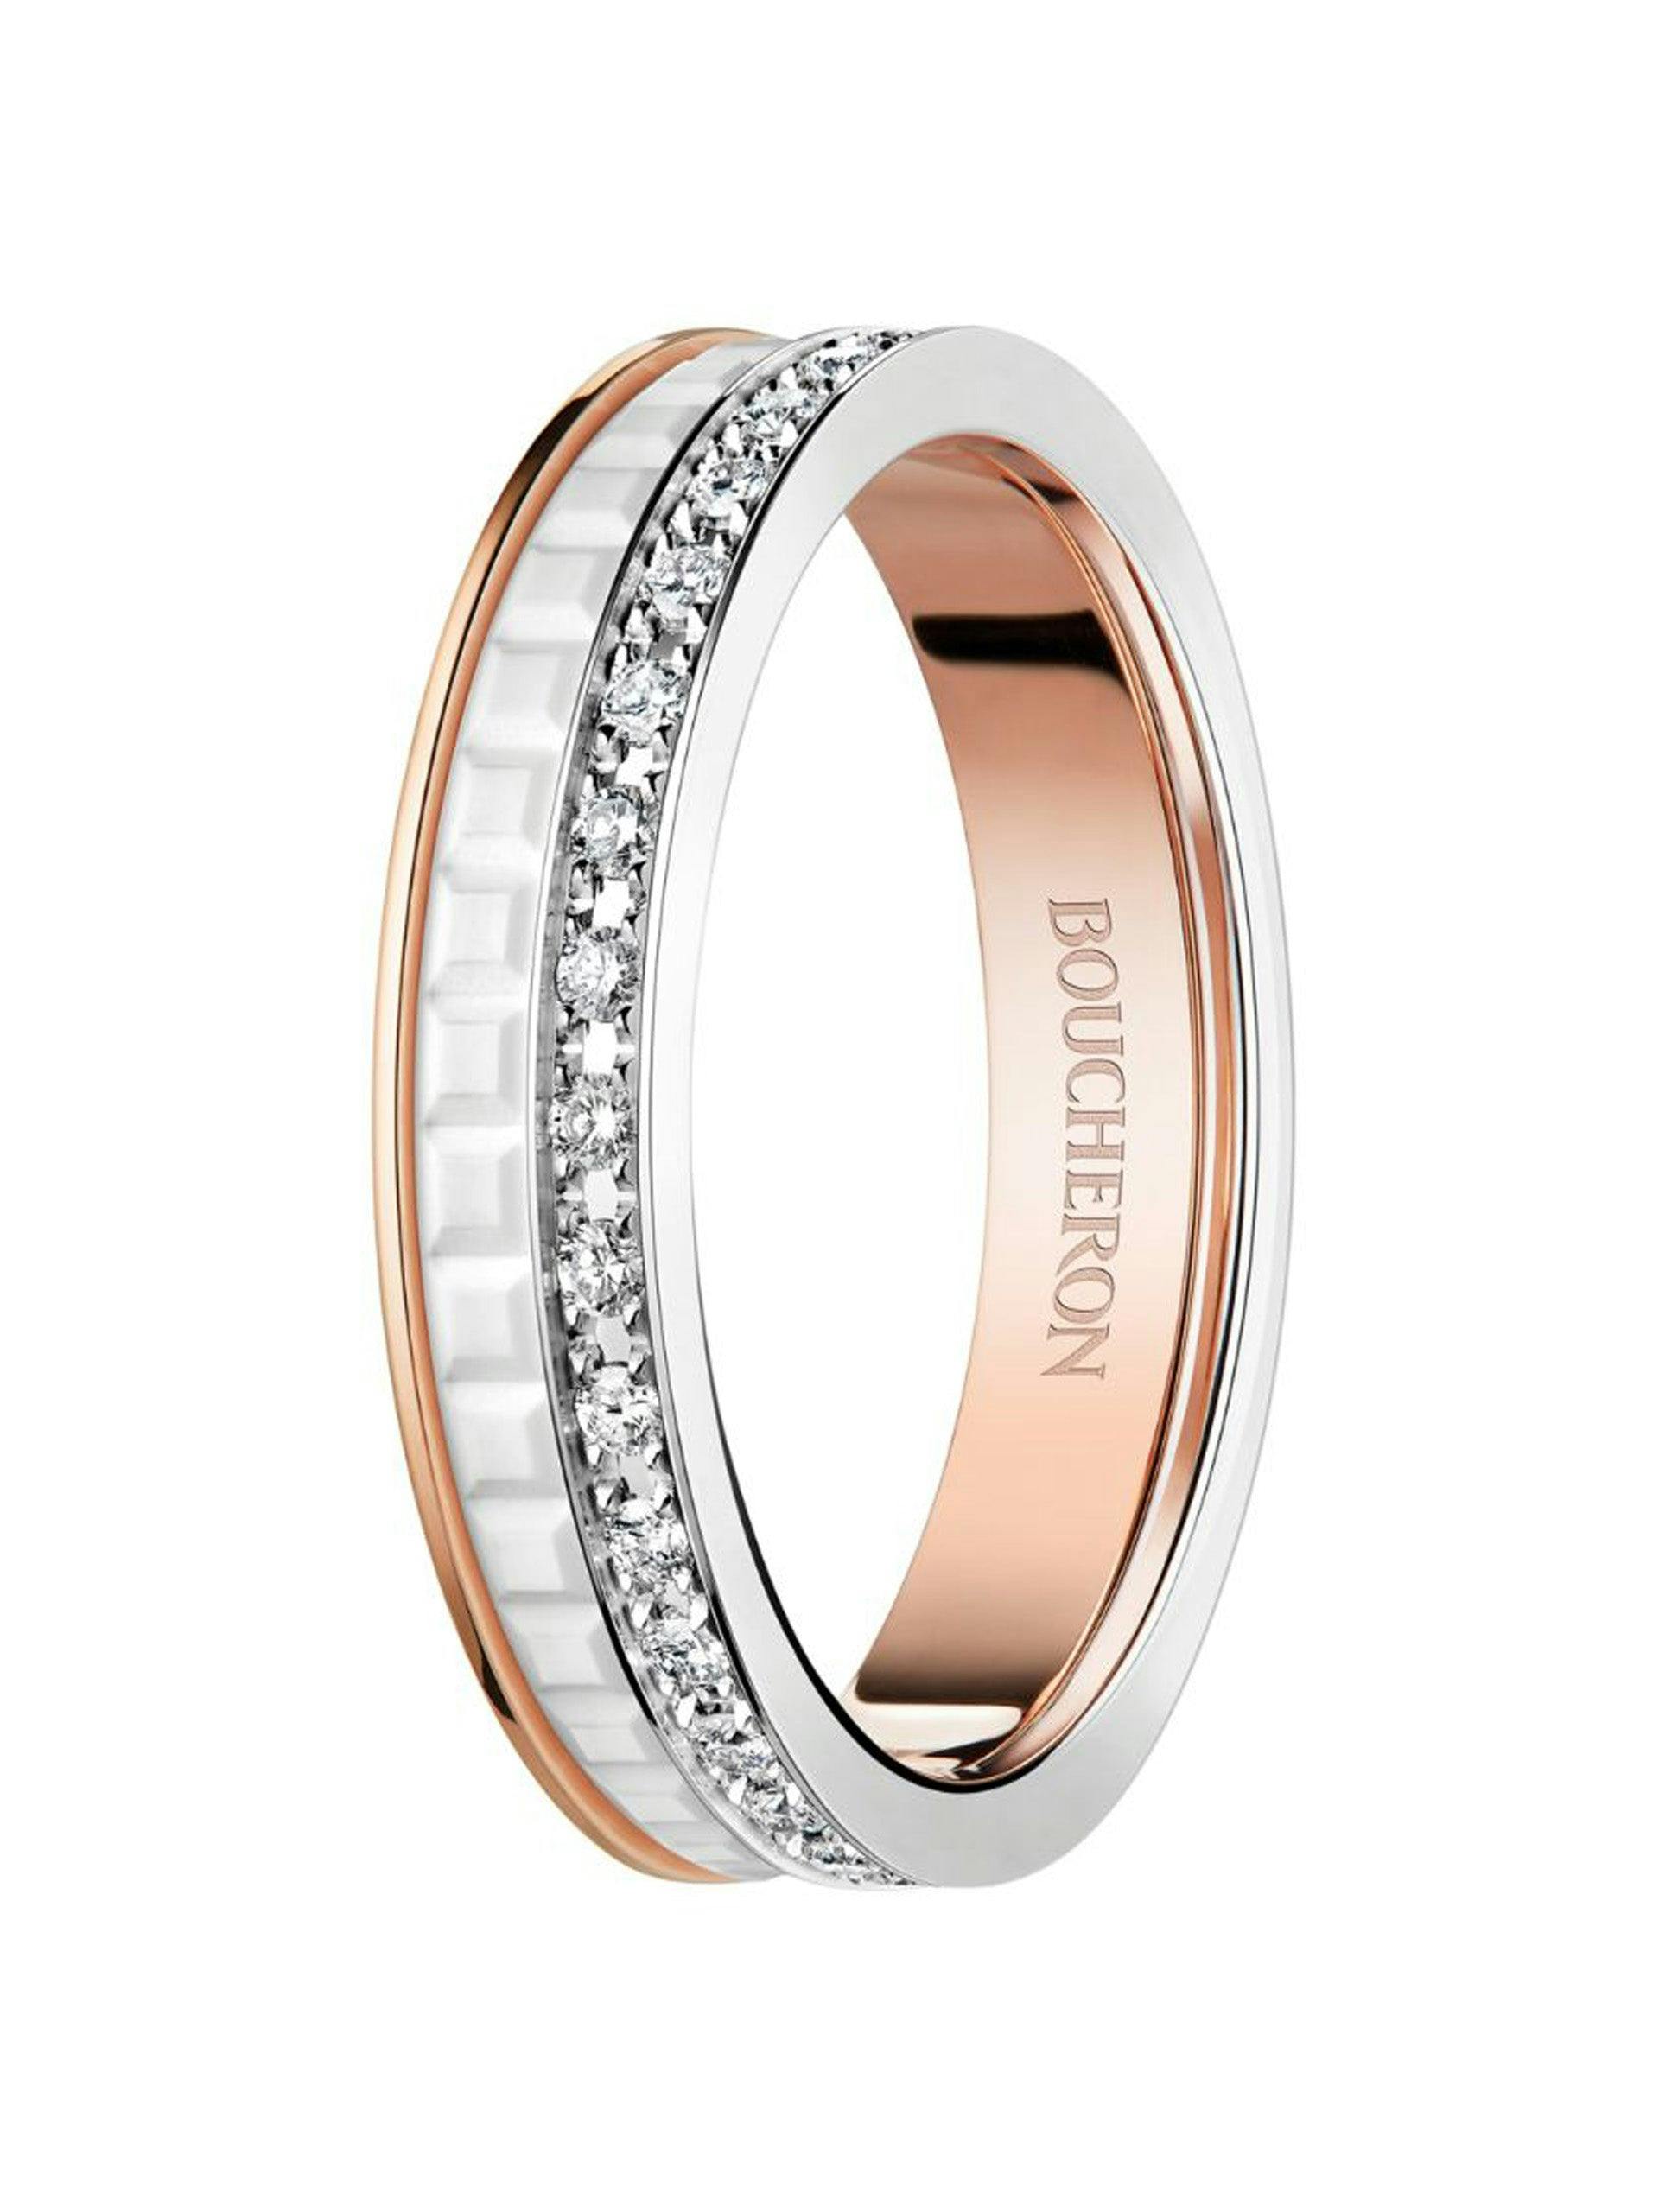 White and gold wedding band